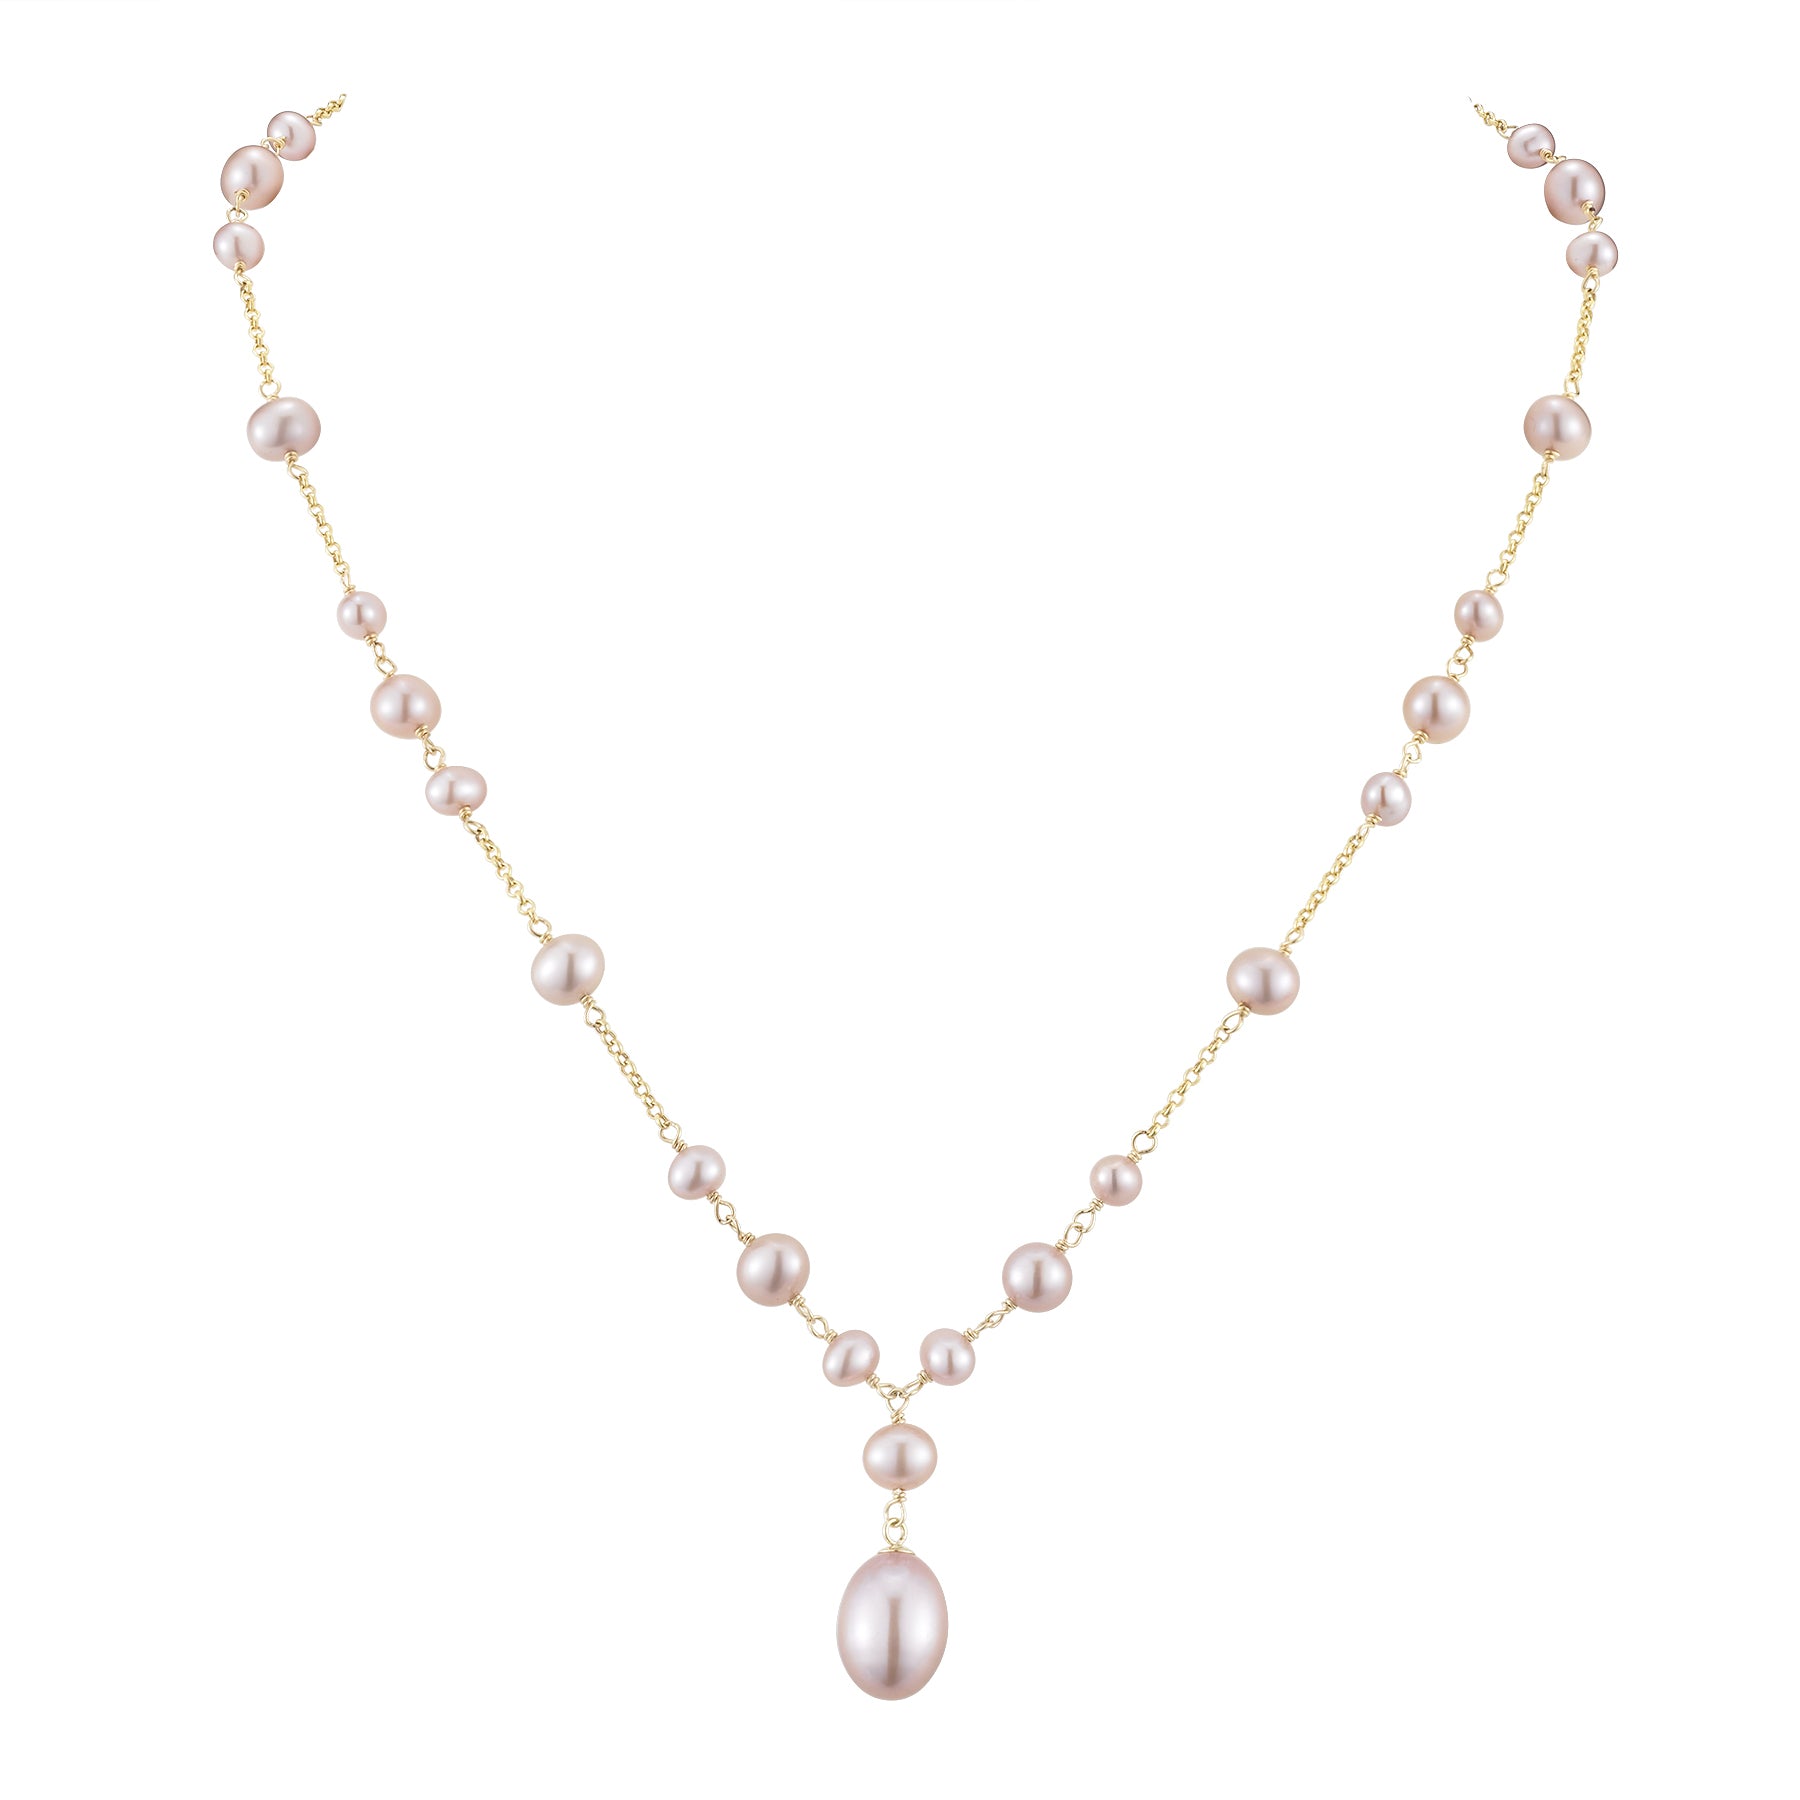 14k Pink Freshwater Pearl Bead Necklace With OBL Drop 17"